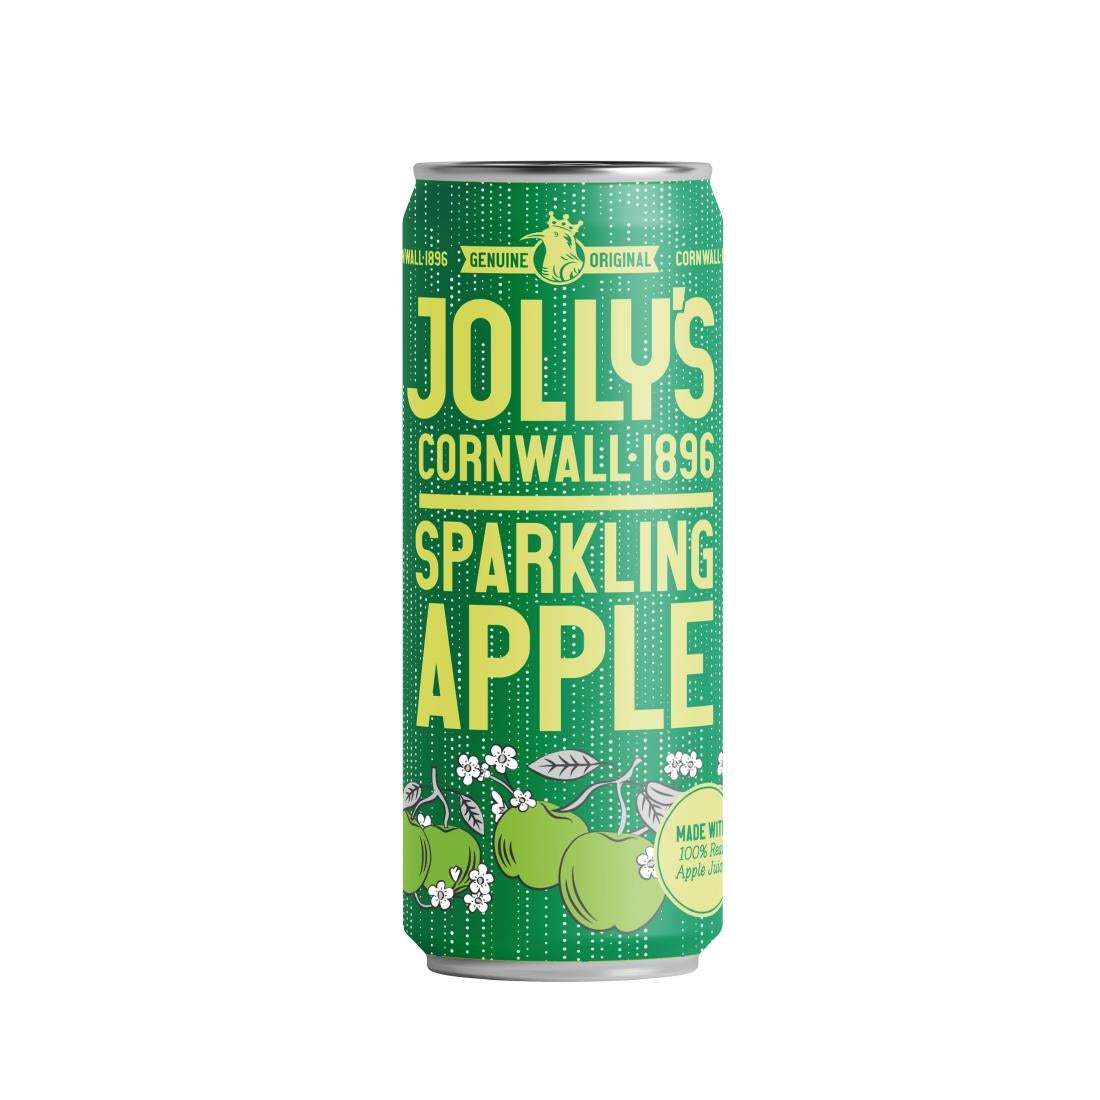 HN941 Jolly's Cornish Sparkling Apple Juice Cans 250ml (Pack of 24)